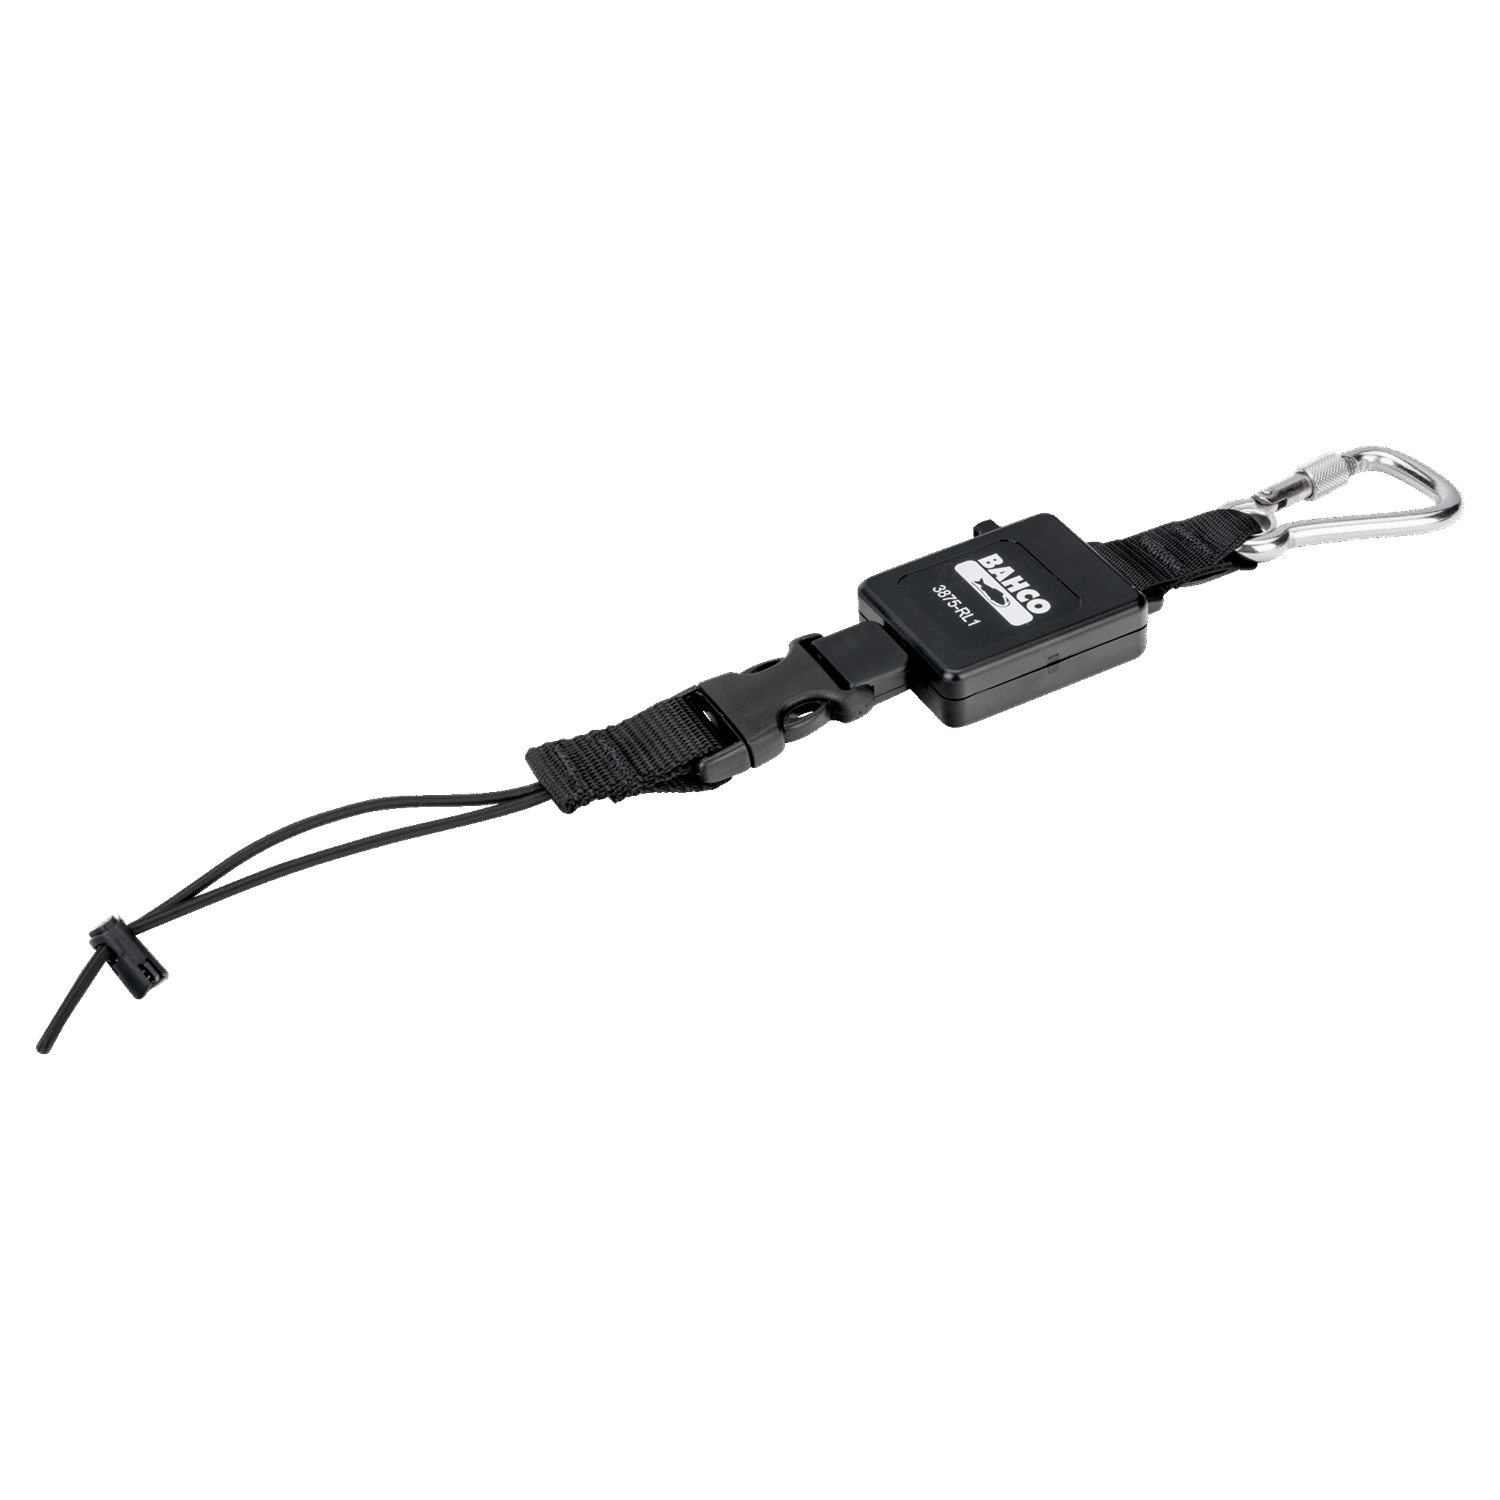 BAHCO 3875-RL1 Retractable Lanyard with Fixed Carabiner 0.9 kg - Premium Retractable Lanyard from BAHCO - Shop now at Yew Aik.